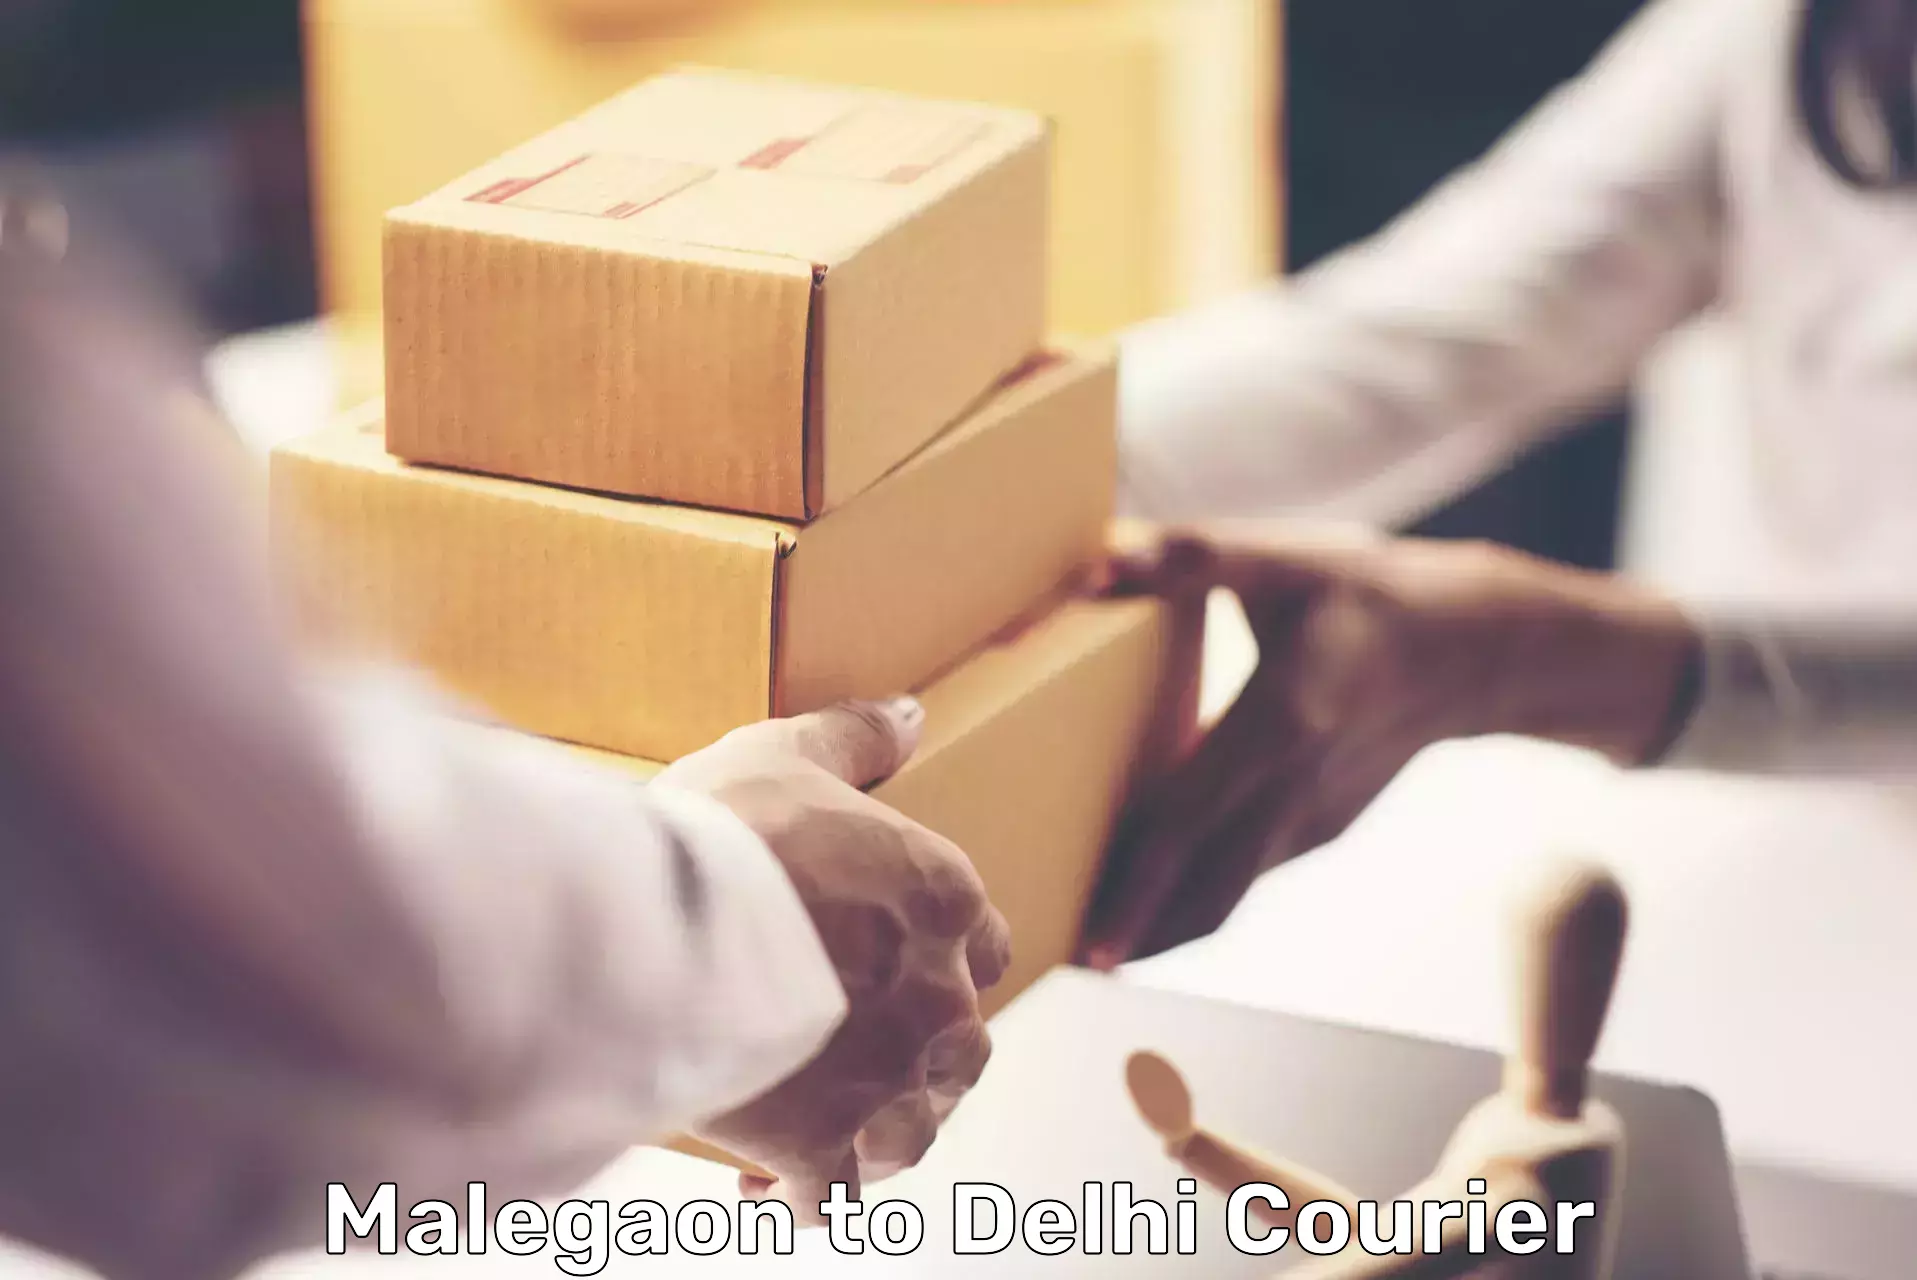 Efficient package consolidation Malegaon to Delhi